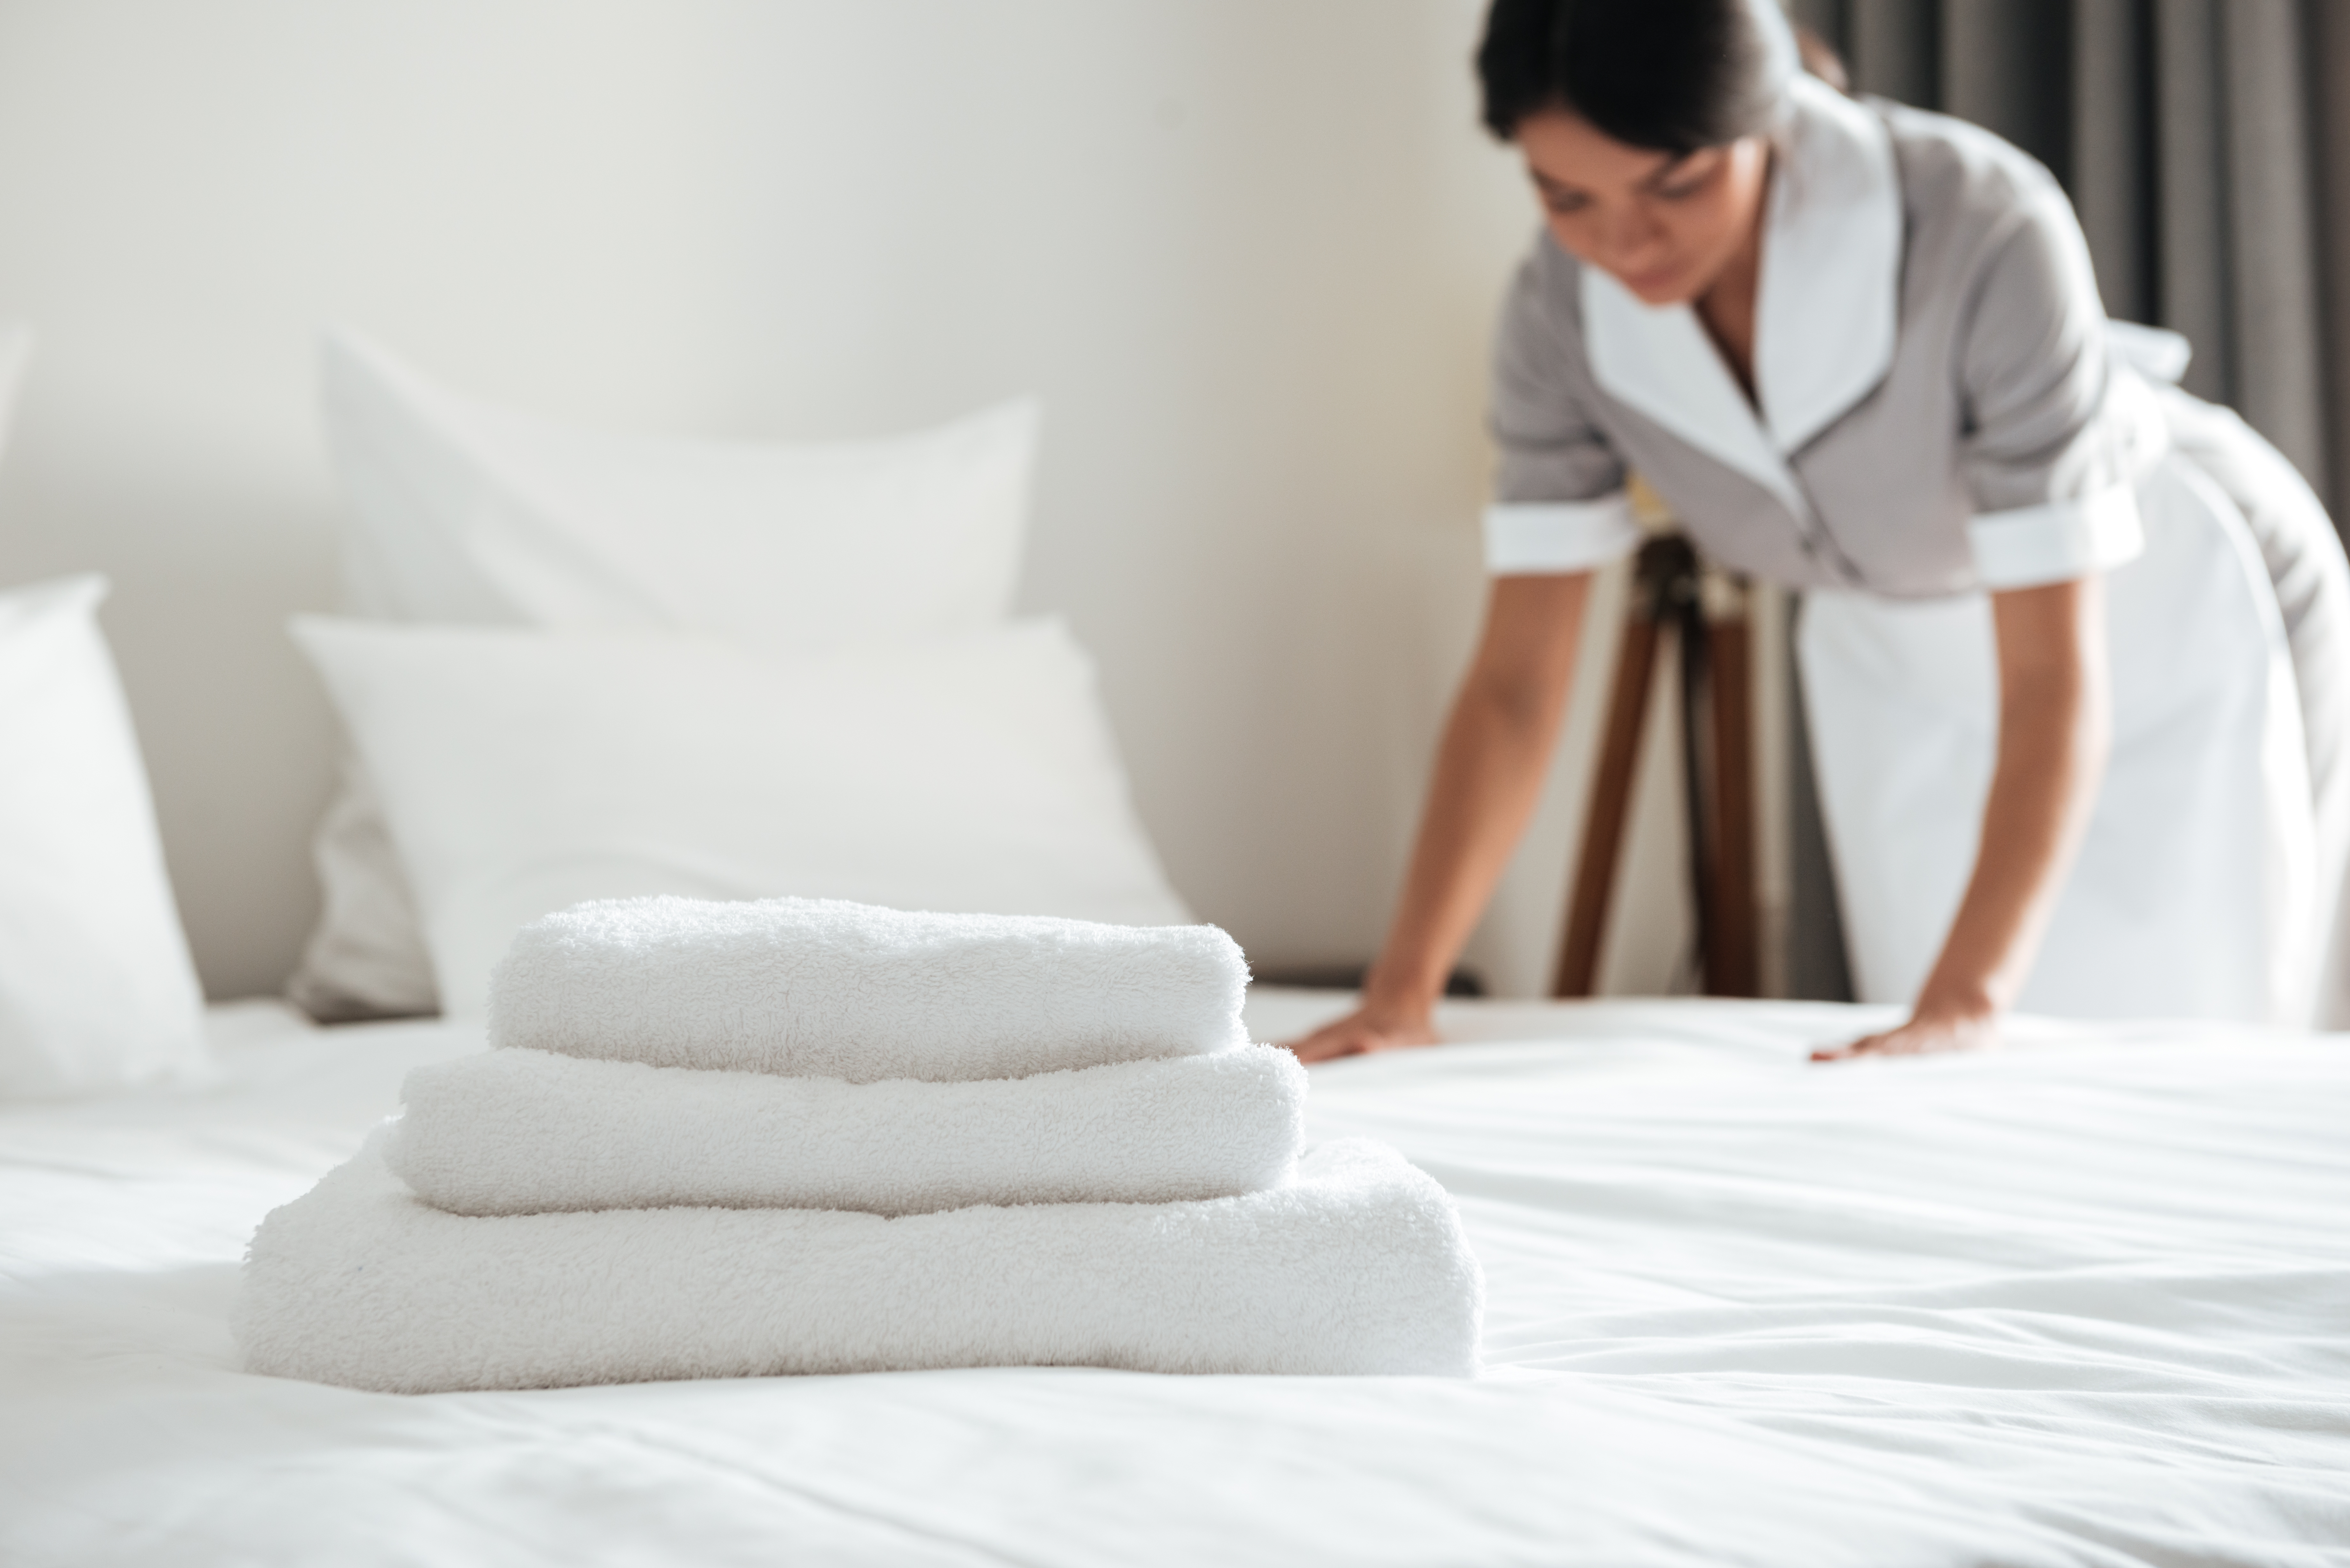 young-hotel-maid-setting-up-pillow-bed